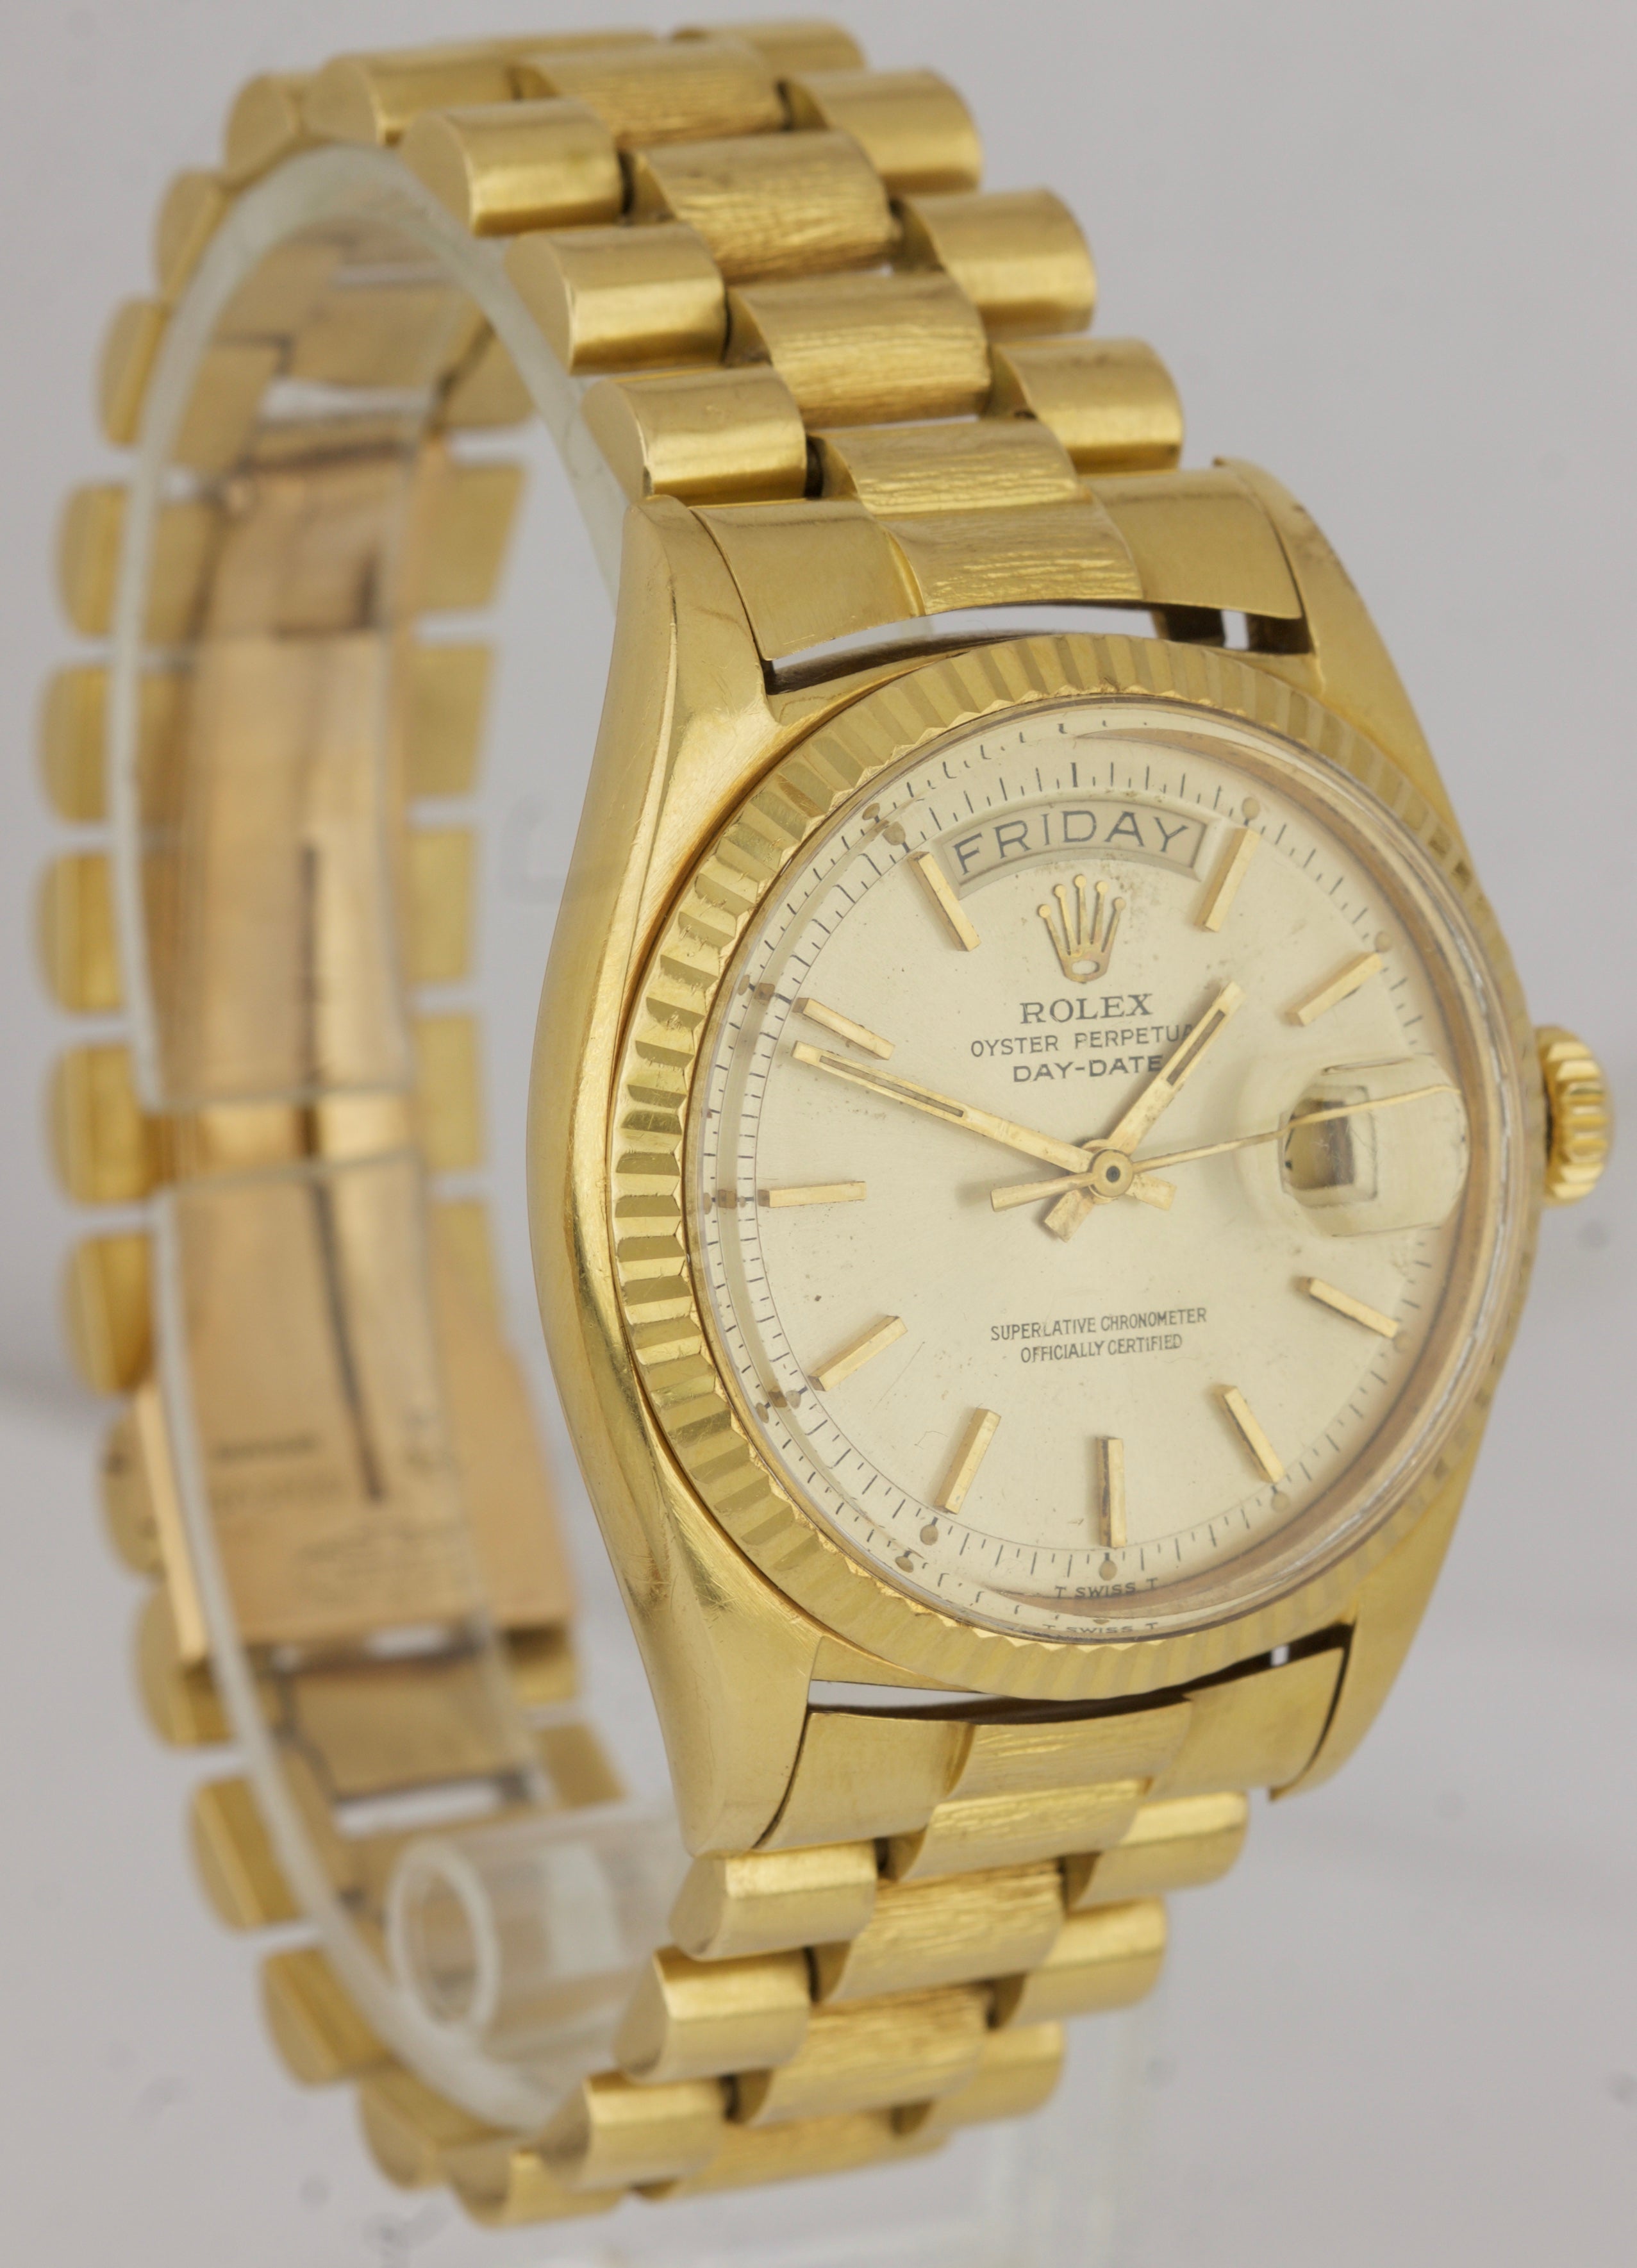 Rolex Day-Date President Pie-Pan Champagne 36mm 18K Yellow Gold Bark Watch 1803